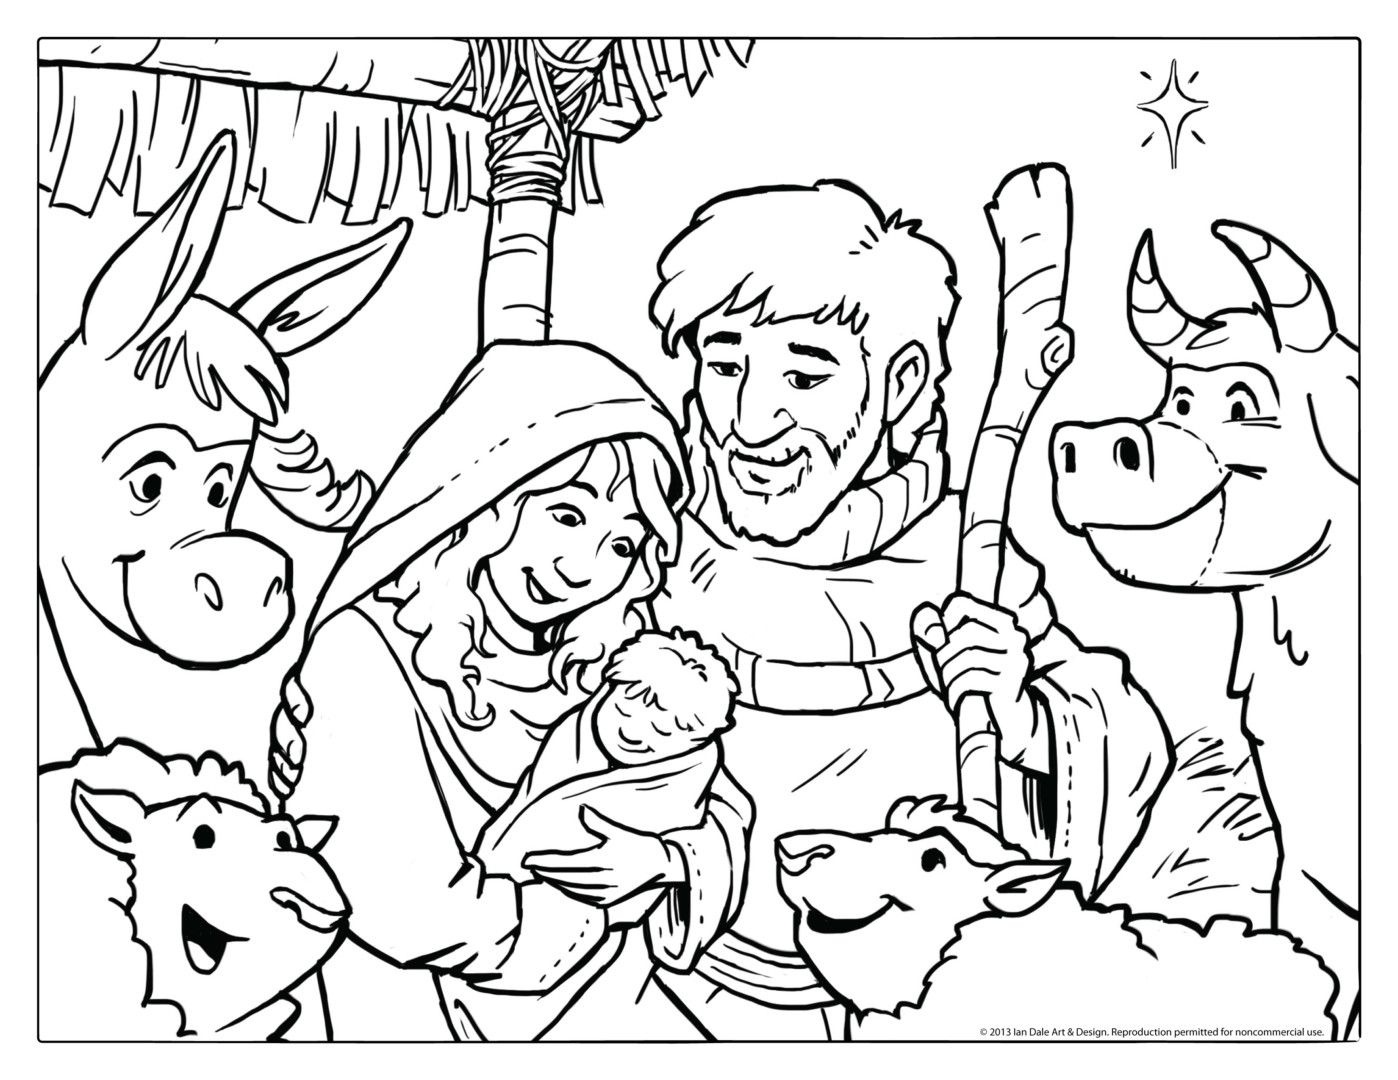 Coloring Pages Ideas: Nativity Scene Coloring Page. Precious Moments - Free Printable Nativity Scene Pictures